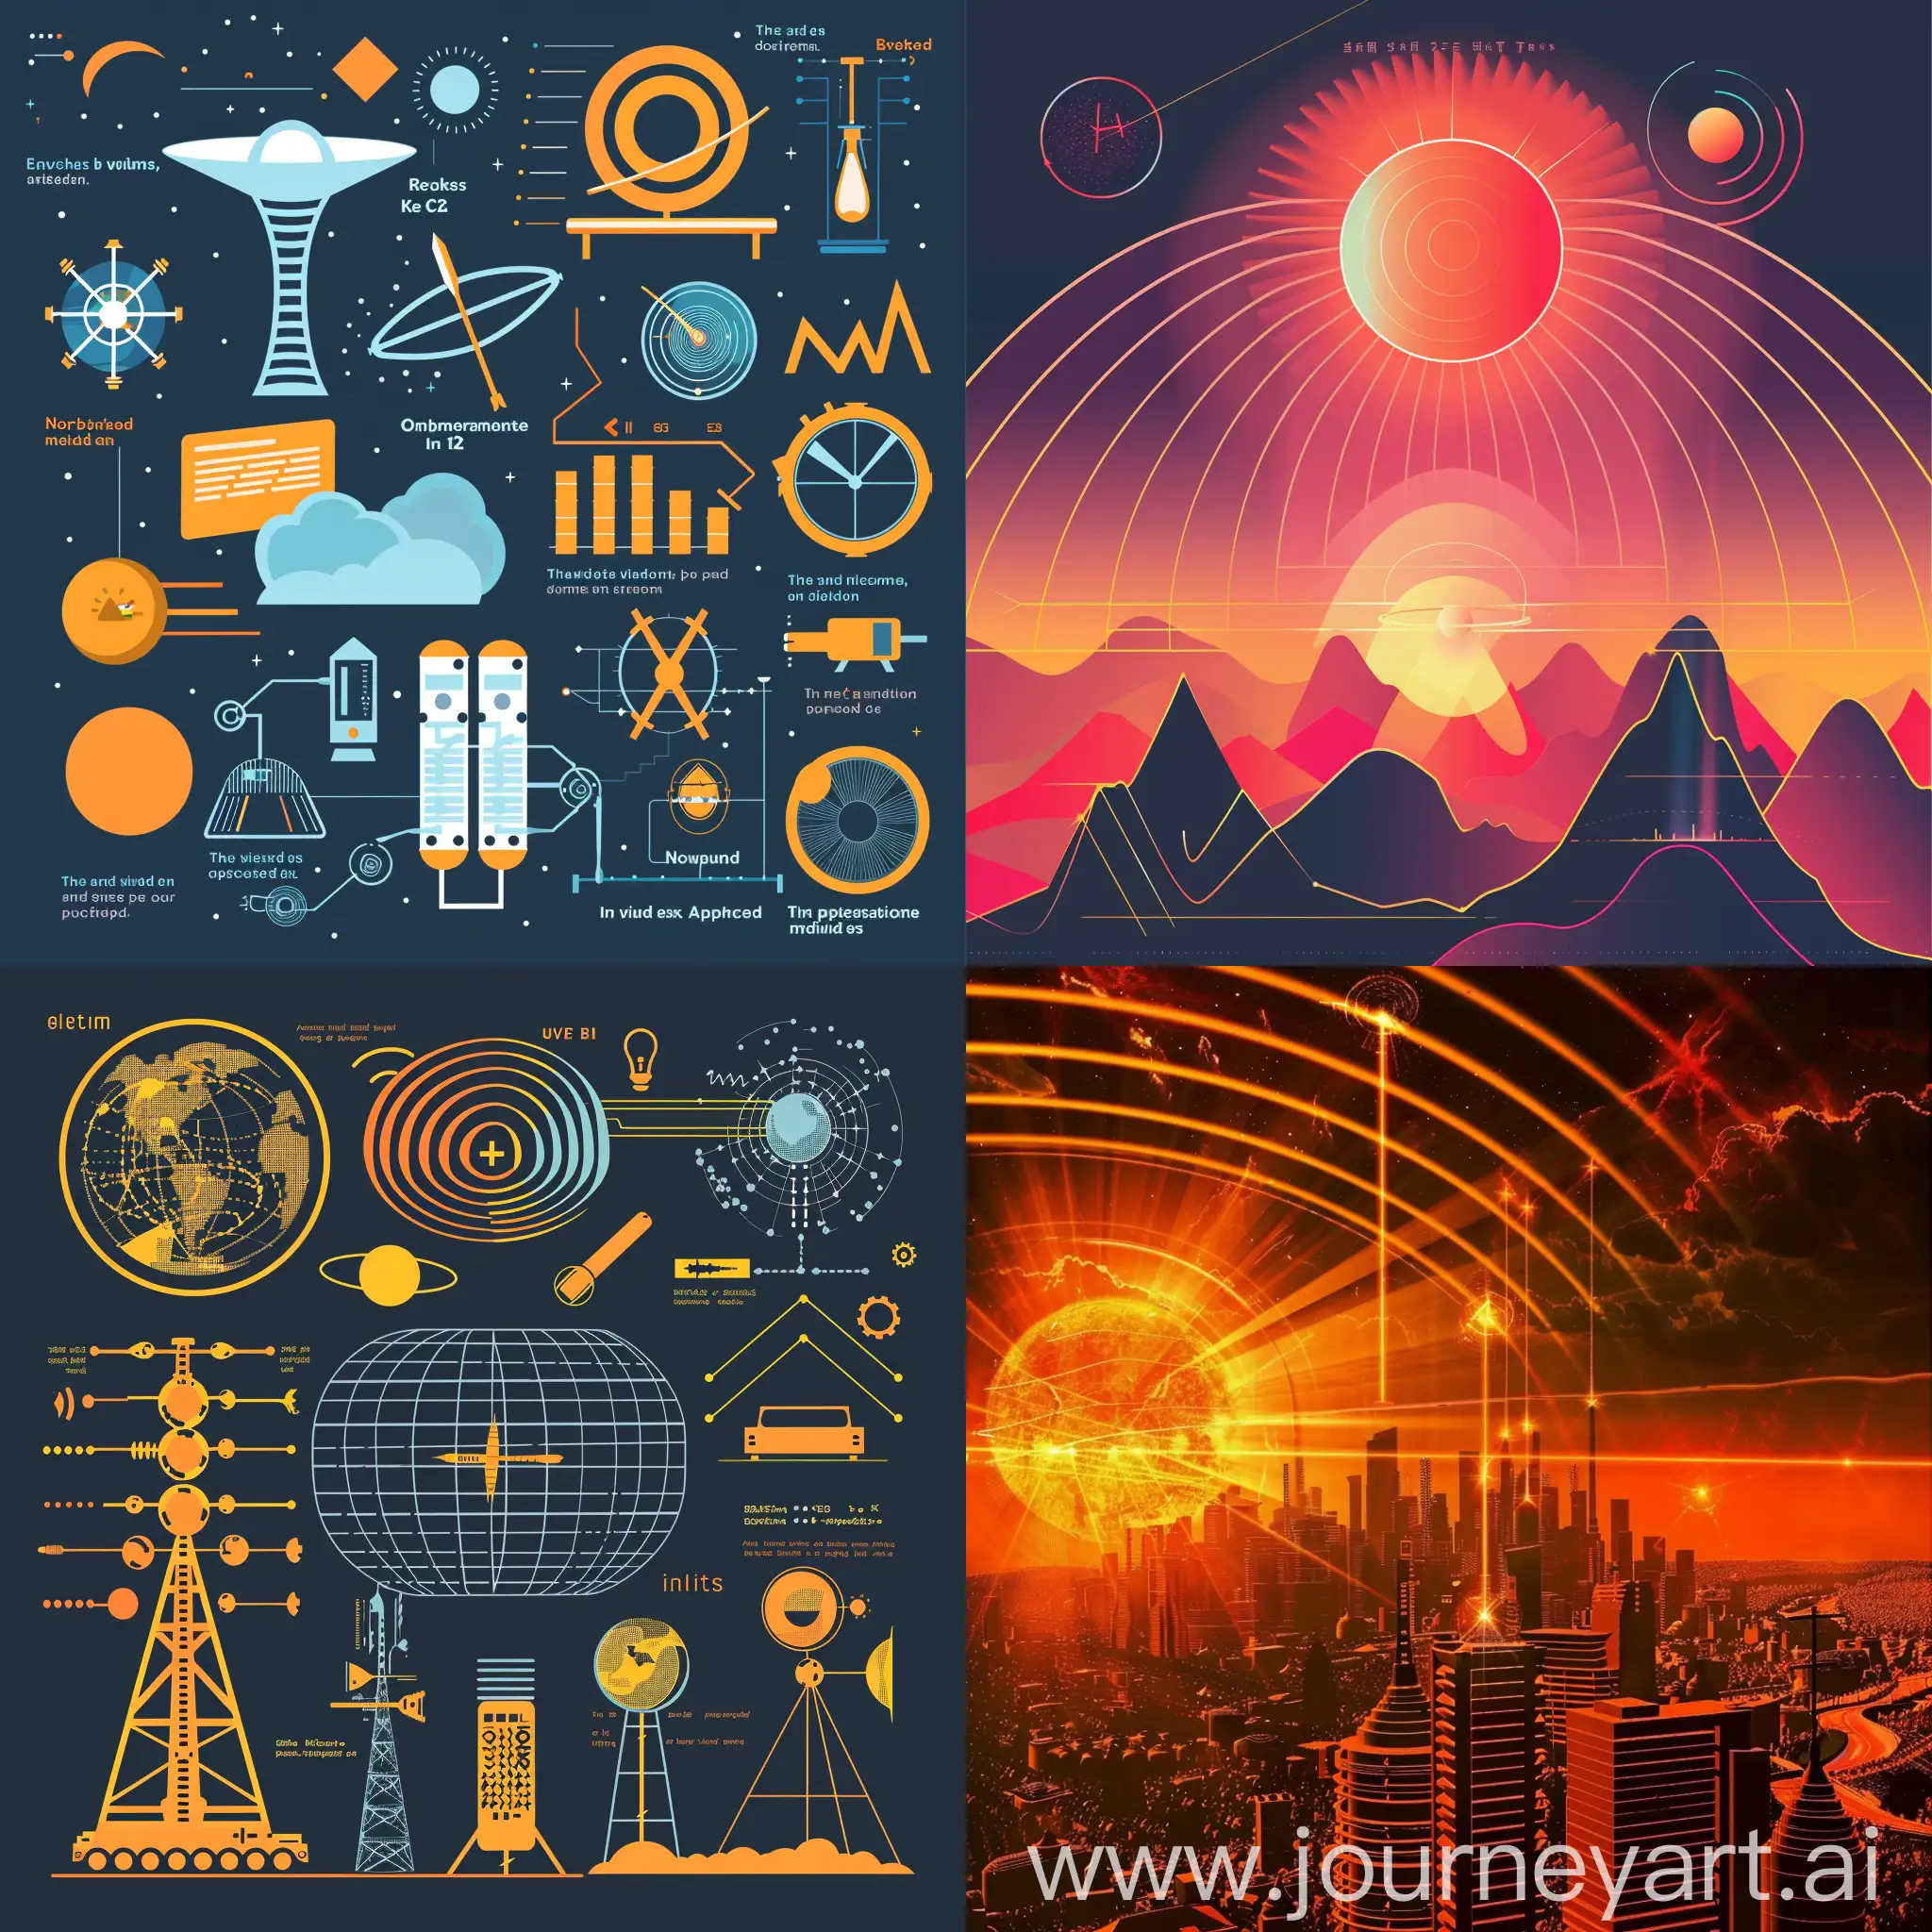 Reallife-Applications-of-Radio-Waves-Microwaves-and-Infrared-Radiation-Poster